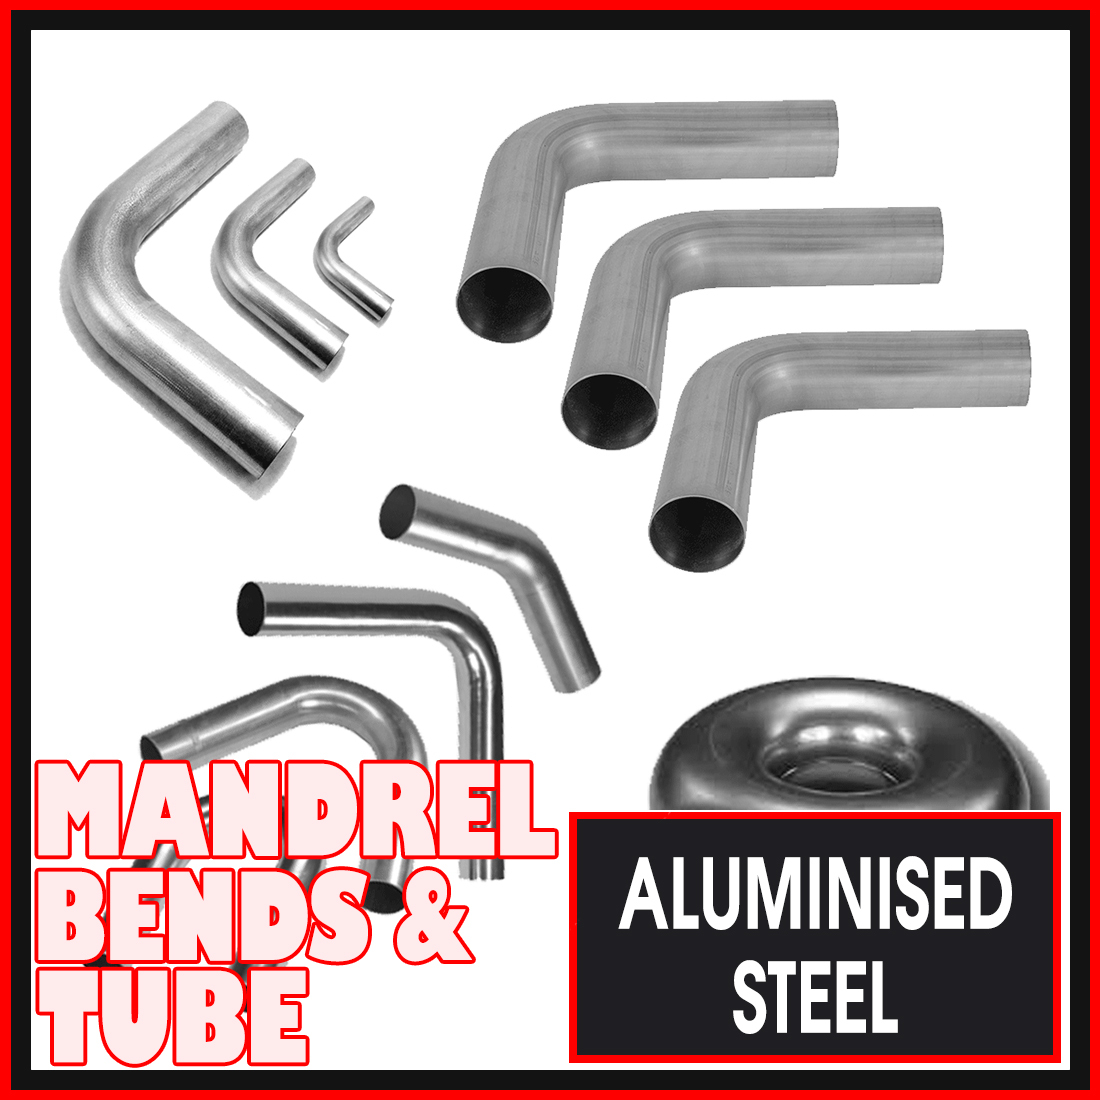 1 1/2" Aluminised Steel Mandrel Bends and Exhaust Pipe image